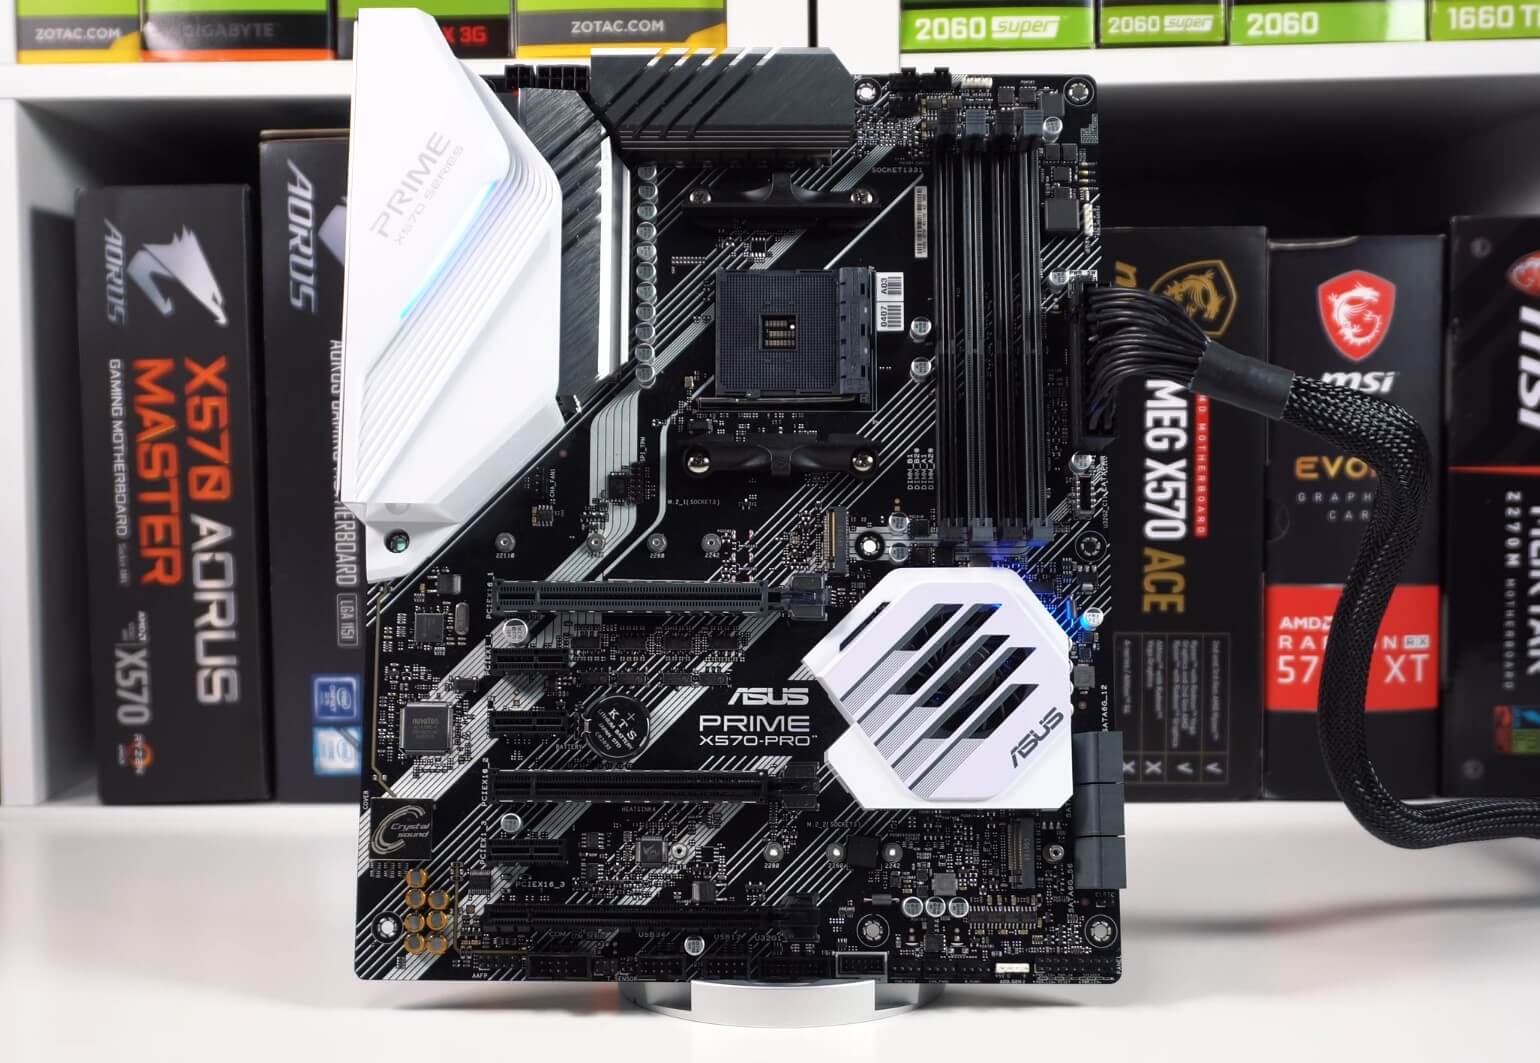  Asus Prime X570-Pro - The White X570 Motherboard